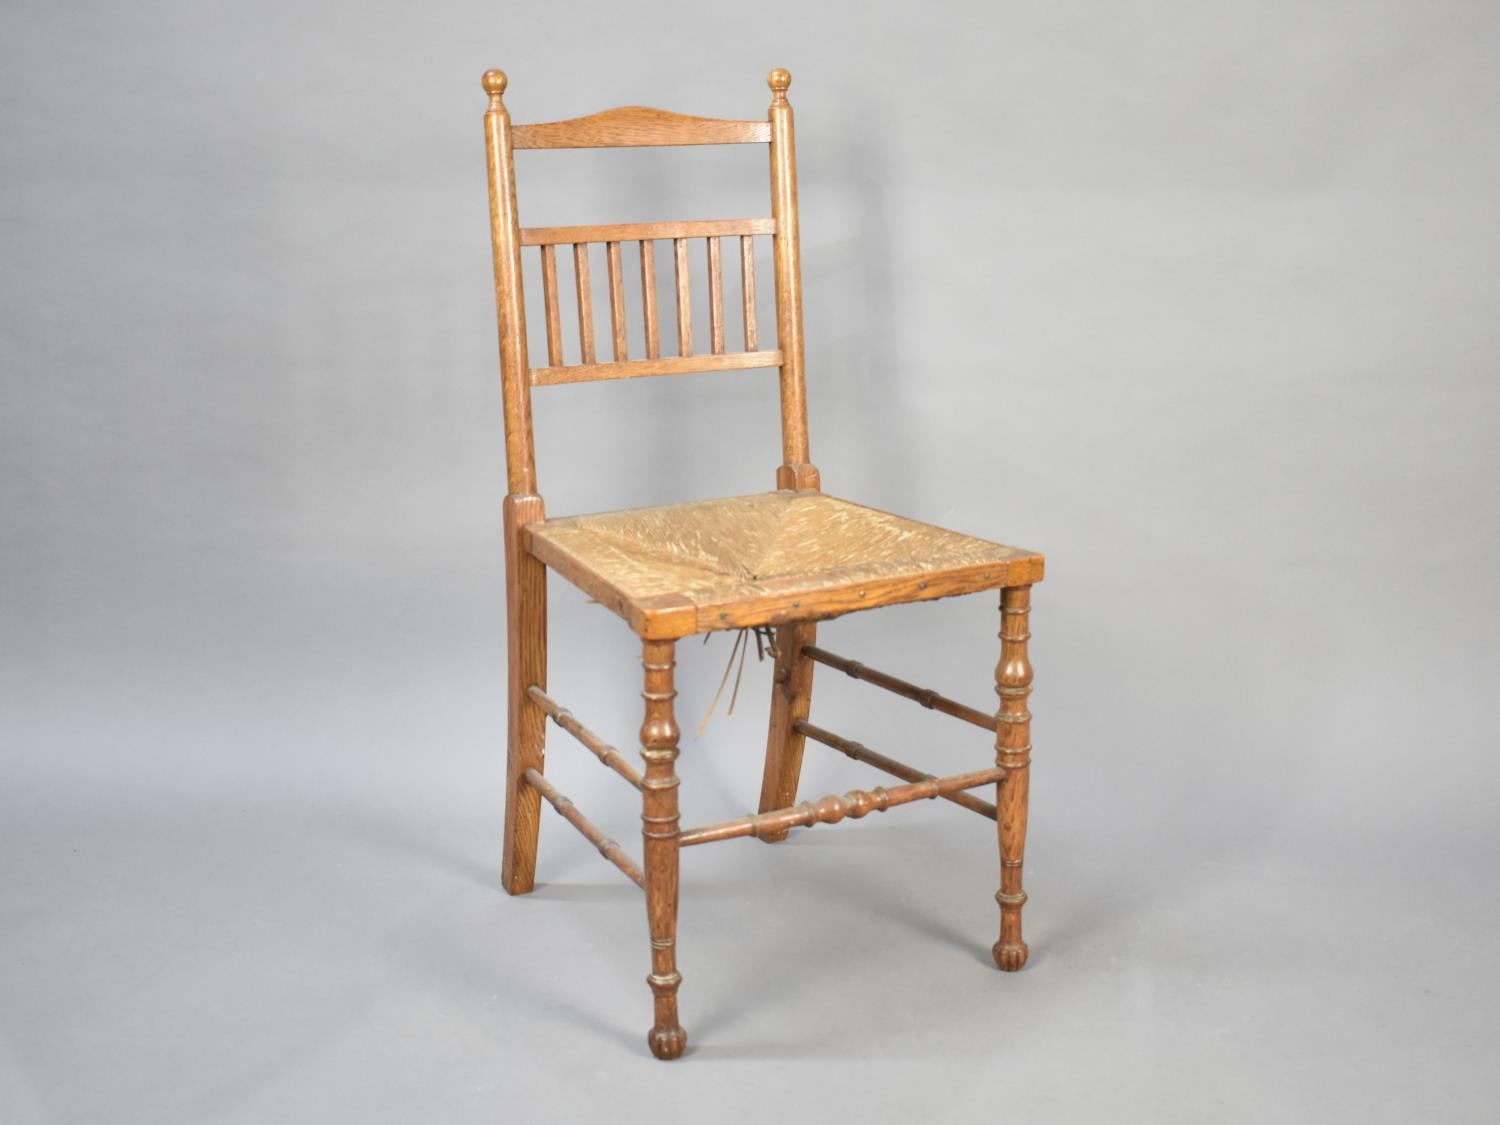 A Small Edwardian Oak Framed Ladies Bedroom Chair, Condition issues